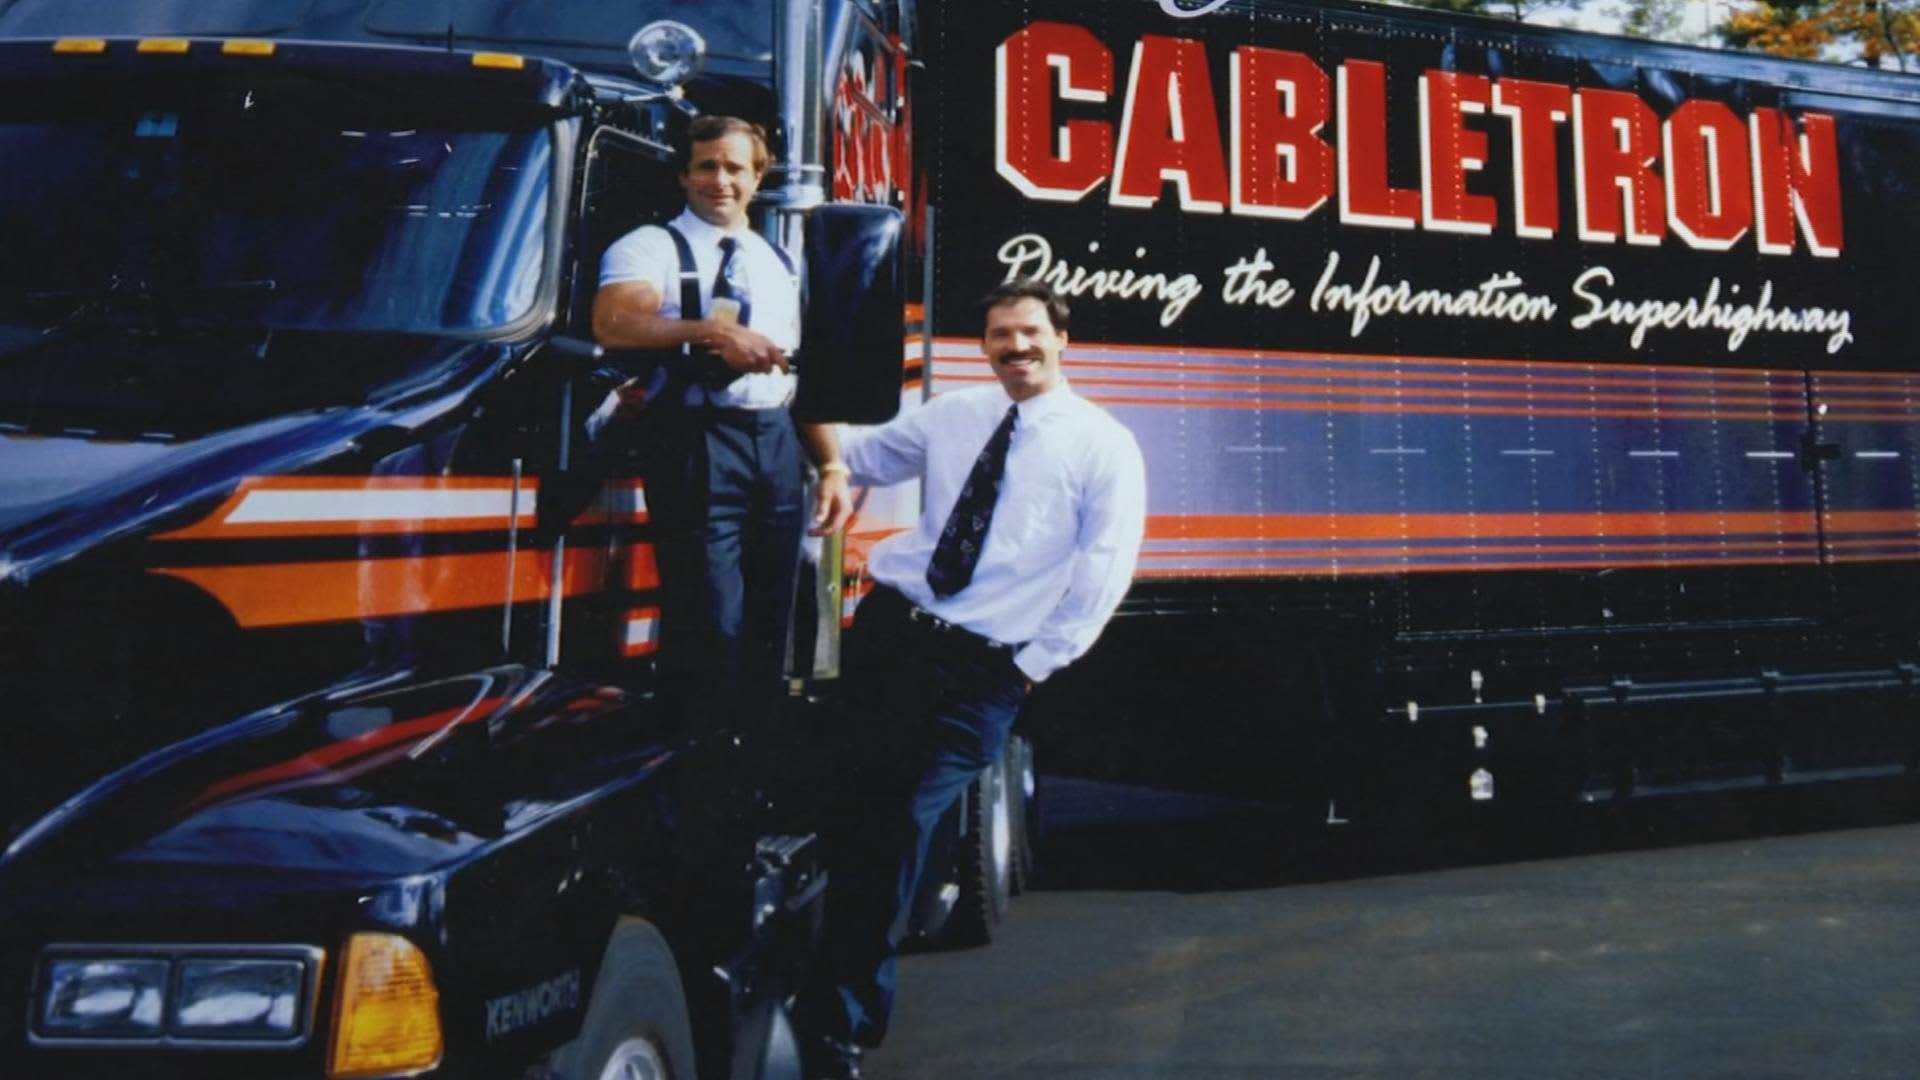 Bob Levine (L) and Craig Benson (R) co-founders of Cabletron Systems